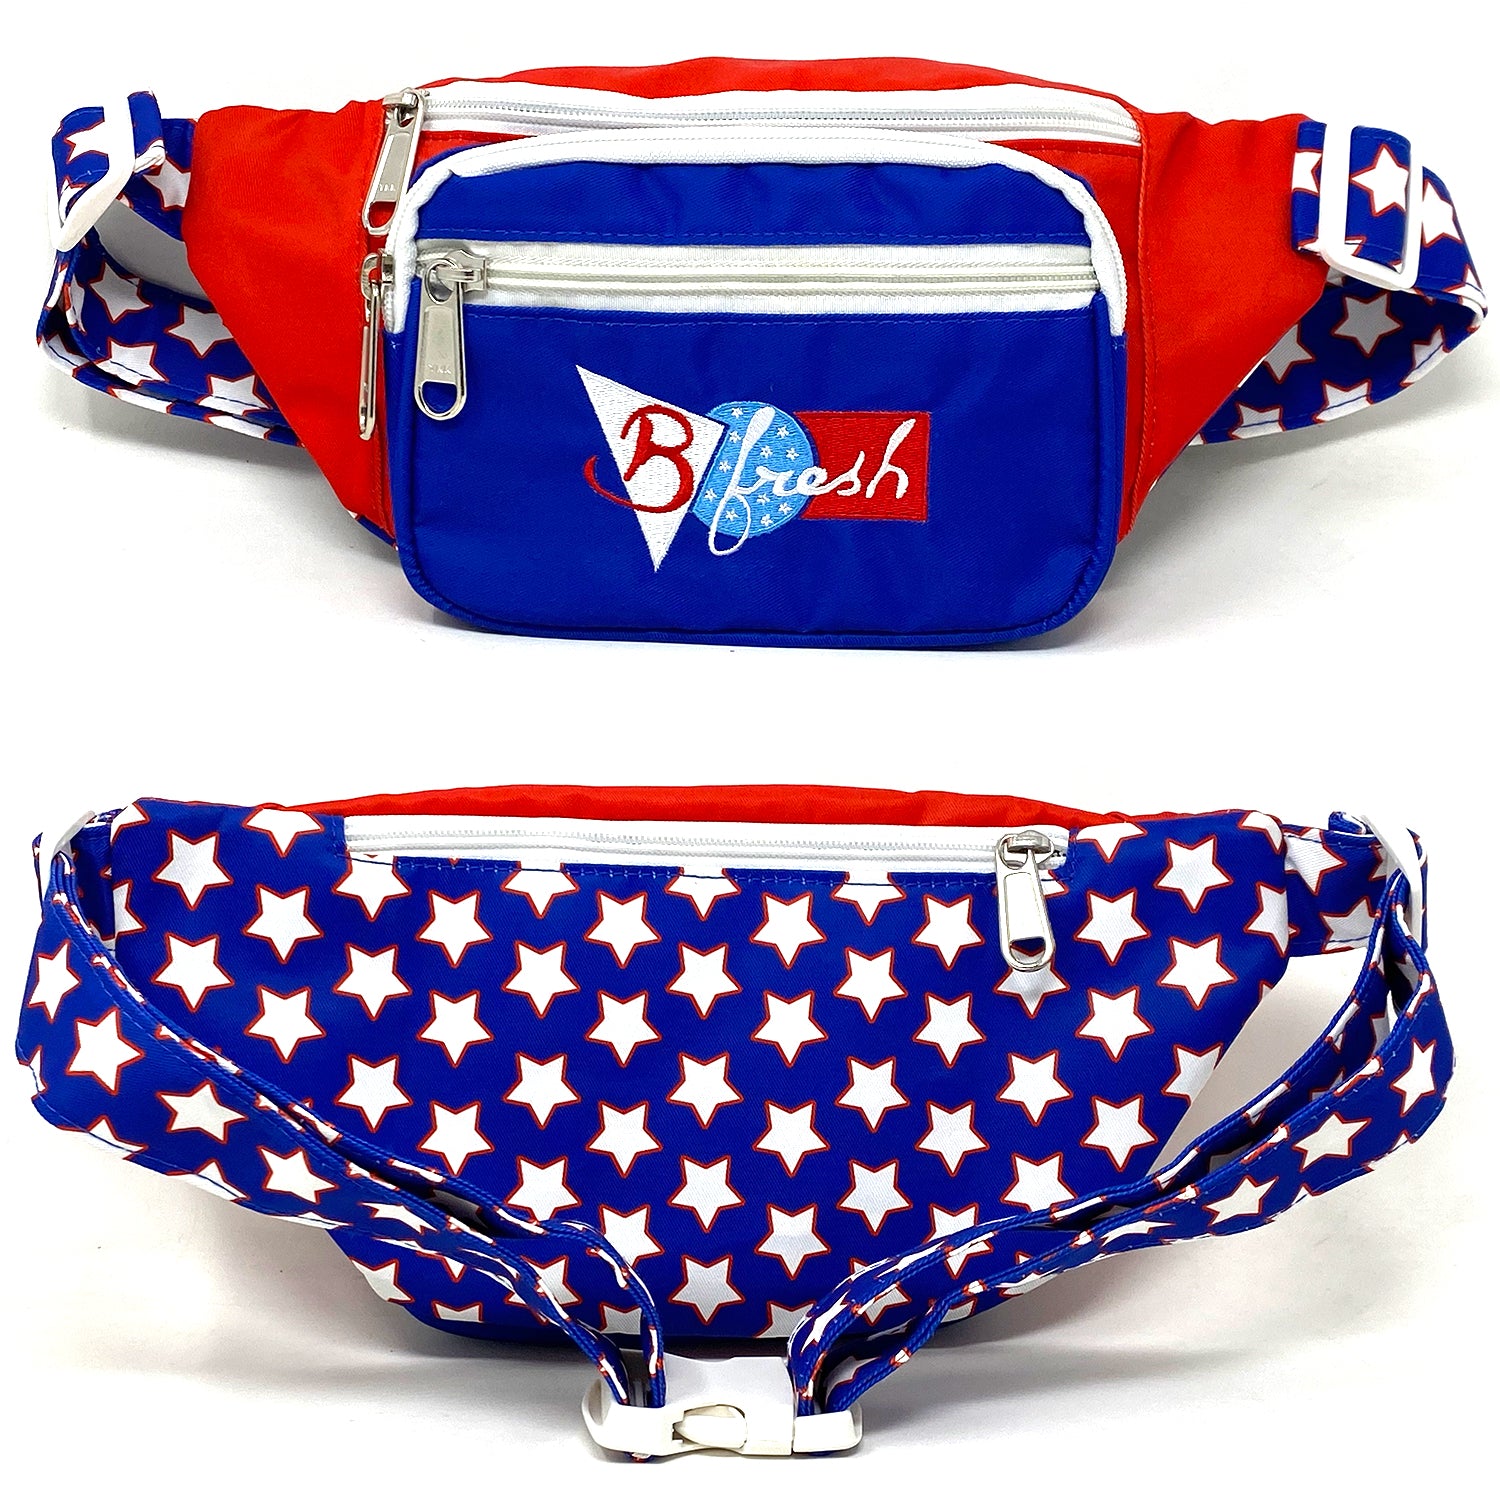 The Presidential Fanny Pack - 4th of July american flag retro style vintage fanny pack - Red white blue retro 4 pocket fanny pack - B Fresh Gear